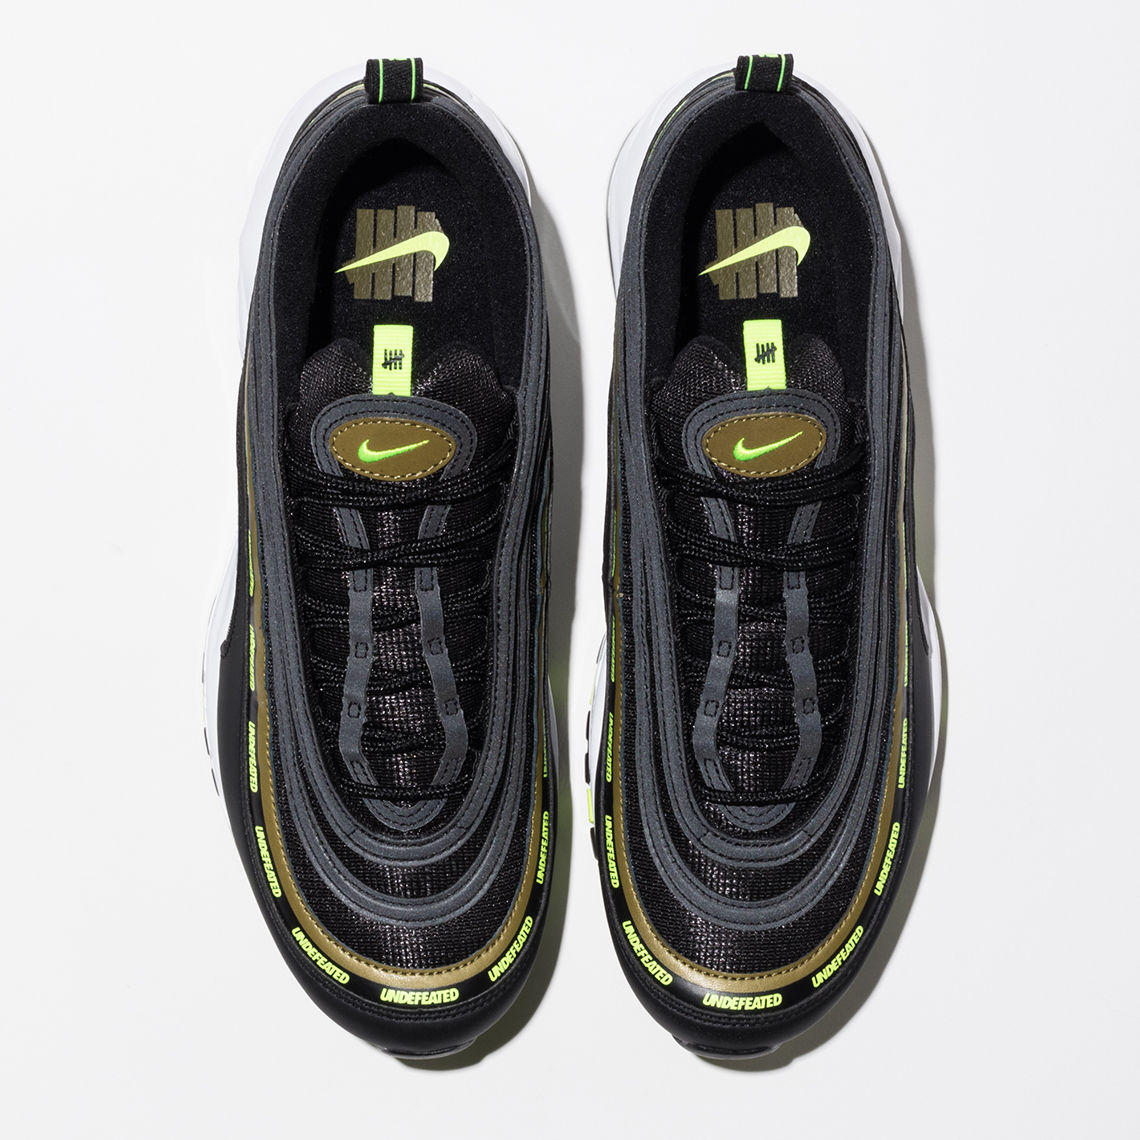 Undefeated Nike Air Max 97 2020 Release Date 10